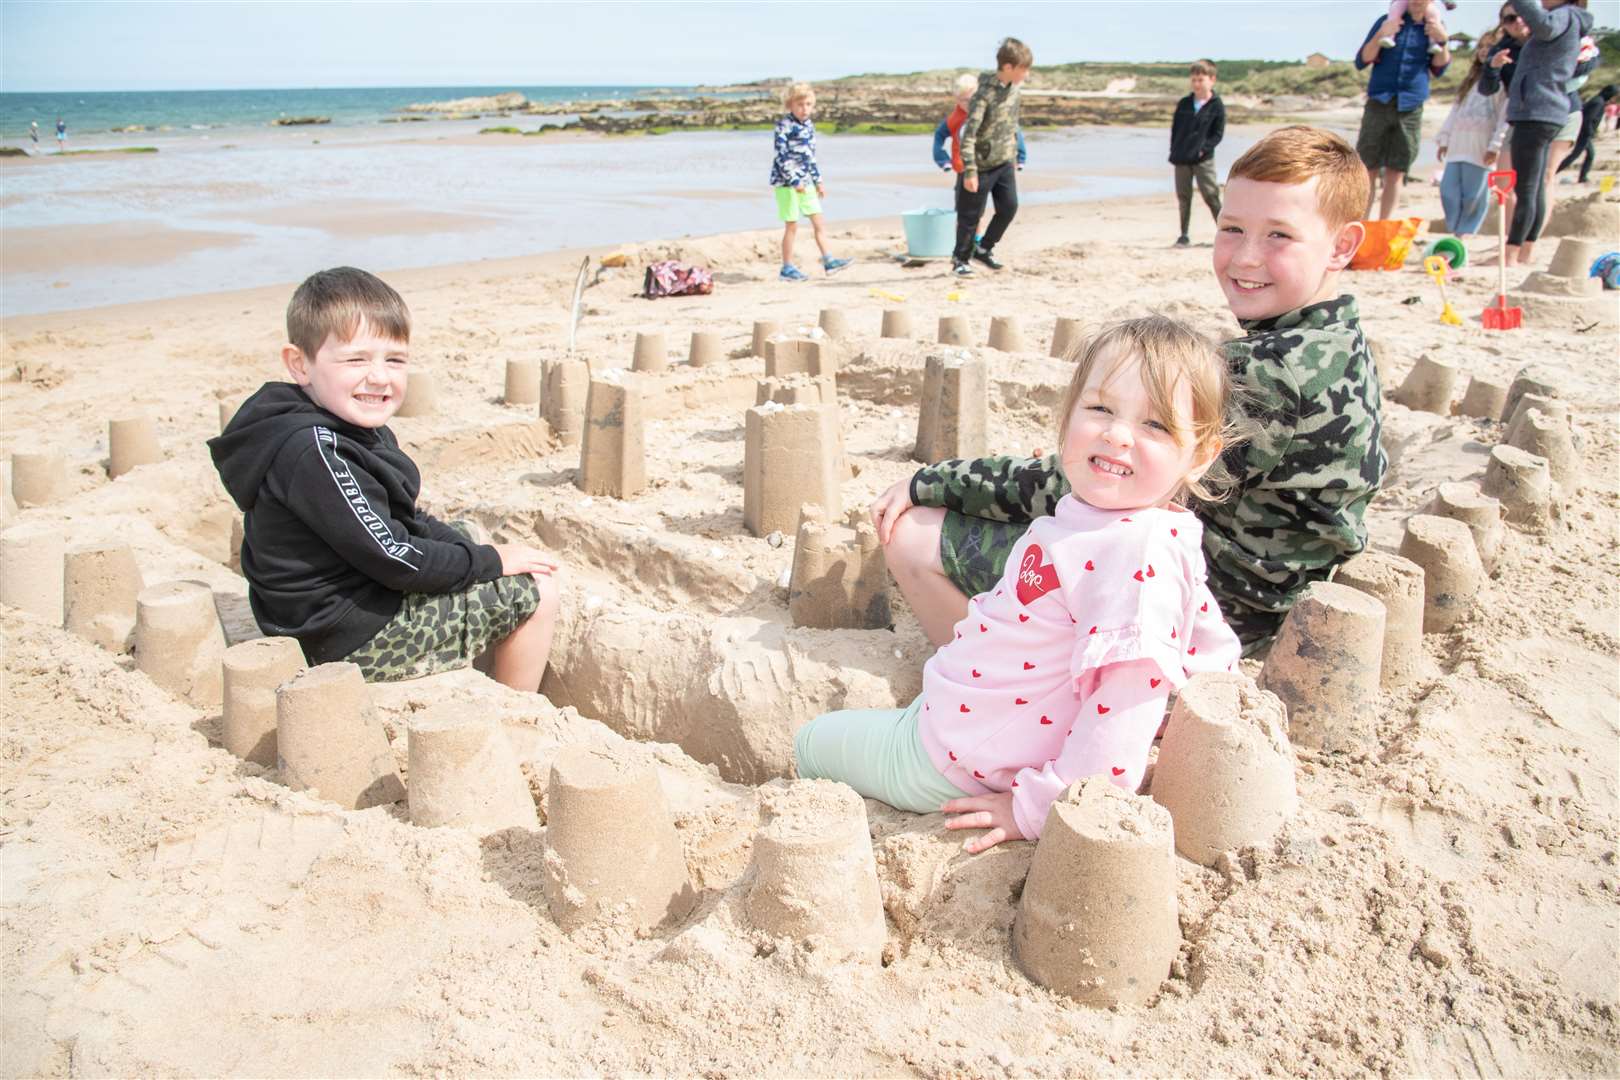 'Taylor's Towers' created by Leo, Lucy and Lucas Taylor at the Sandcastle Competition. Picture: Daniel Forsyth